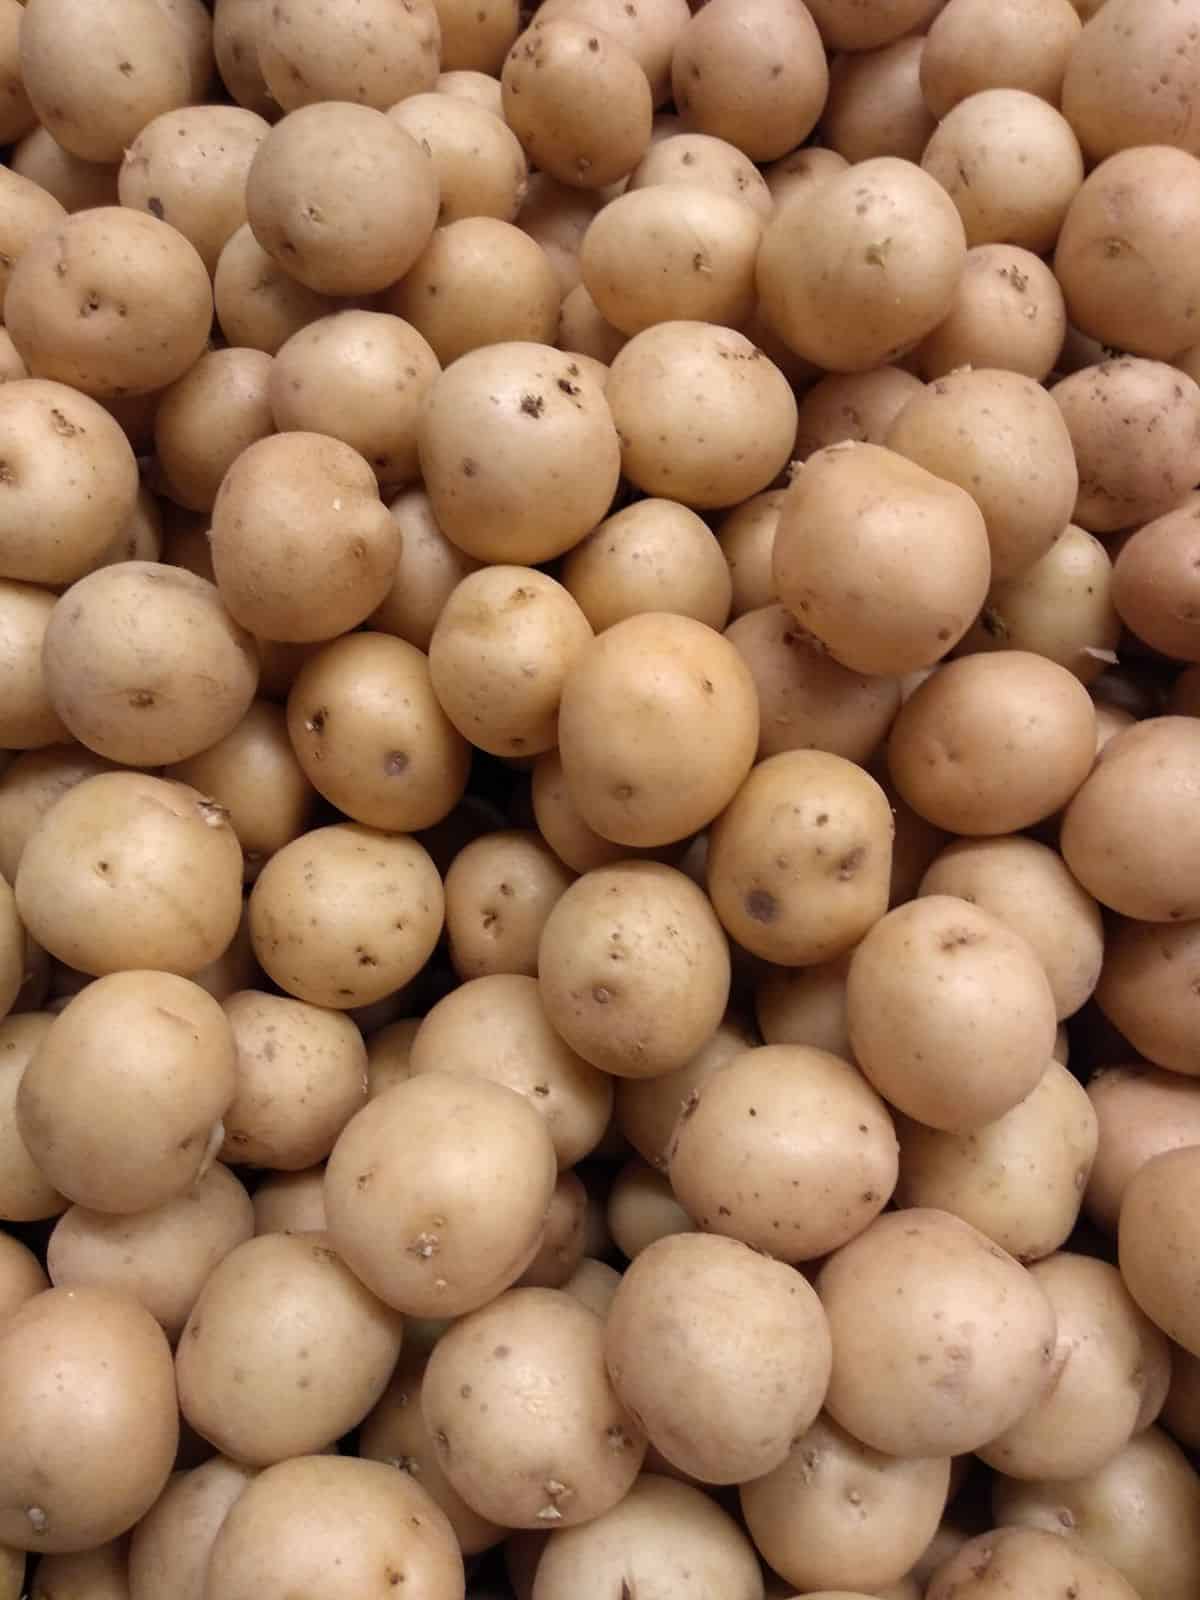 A close up of a bin of gold colred potatoes